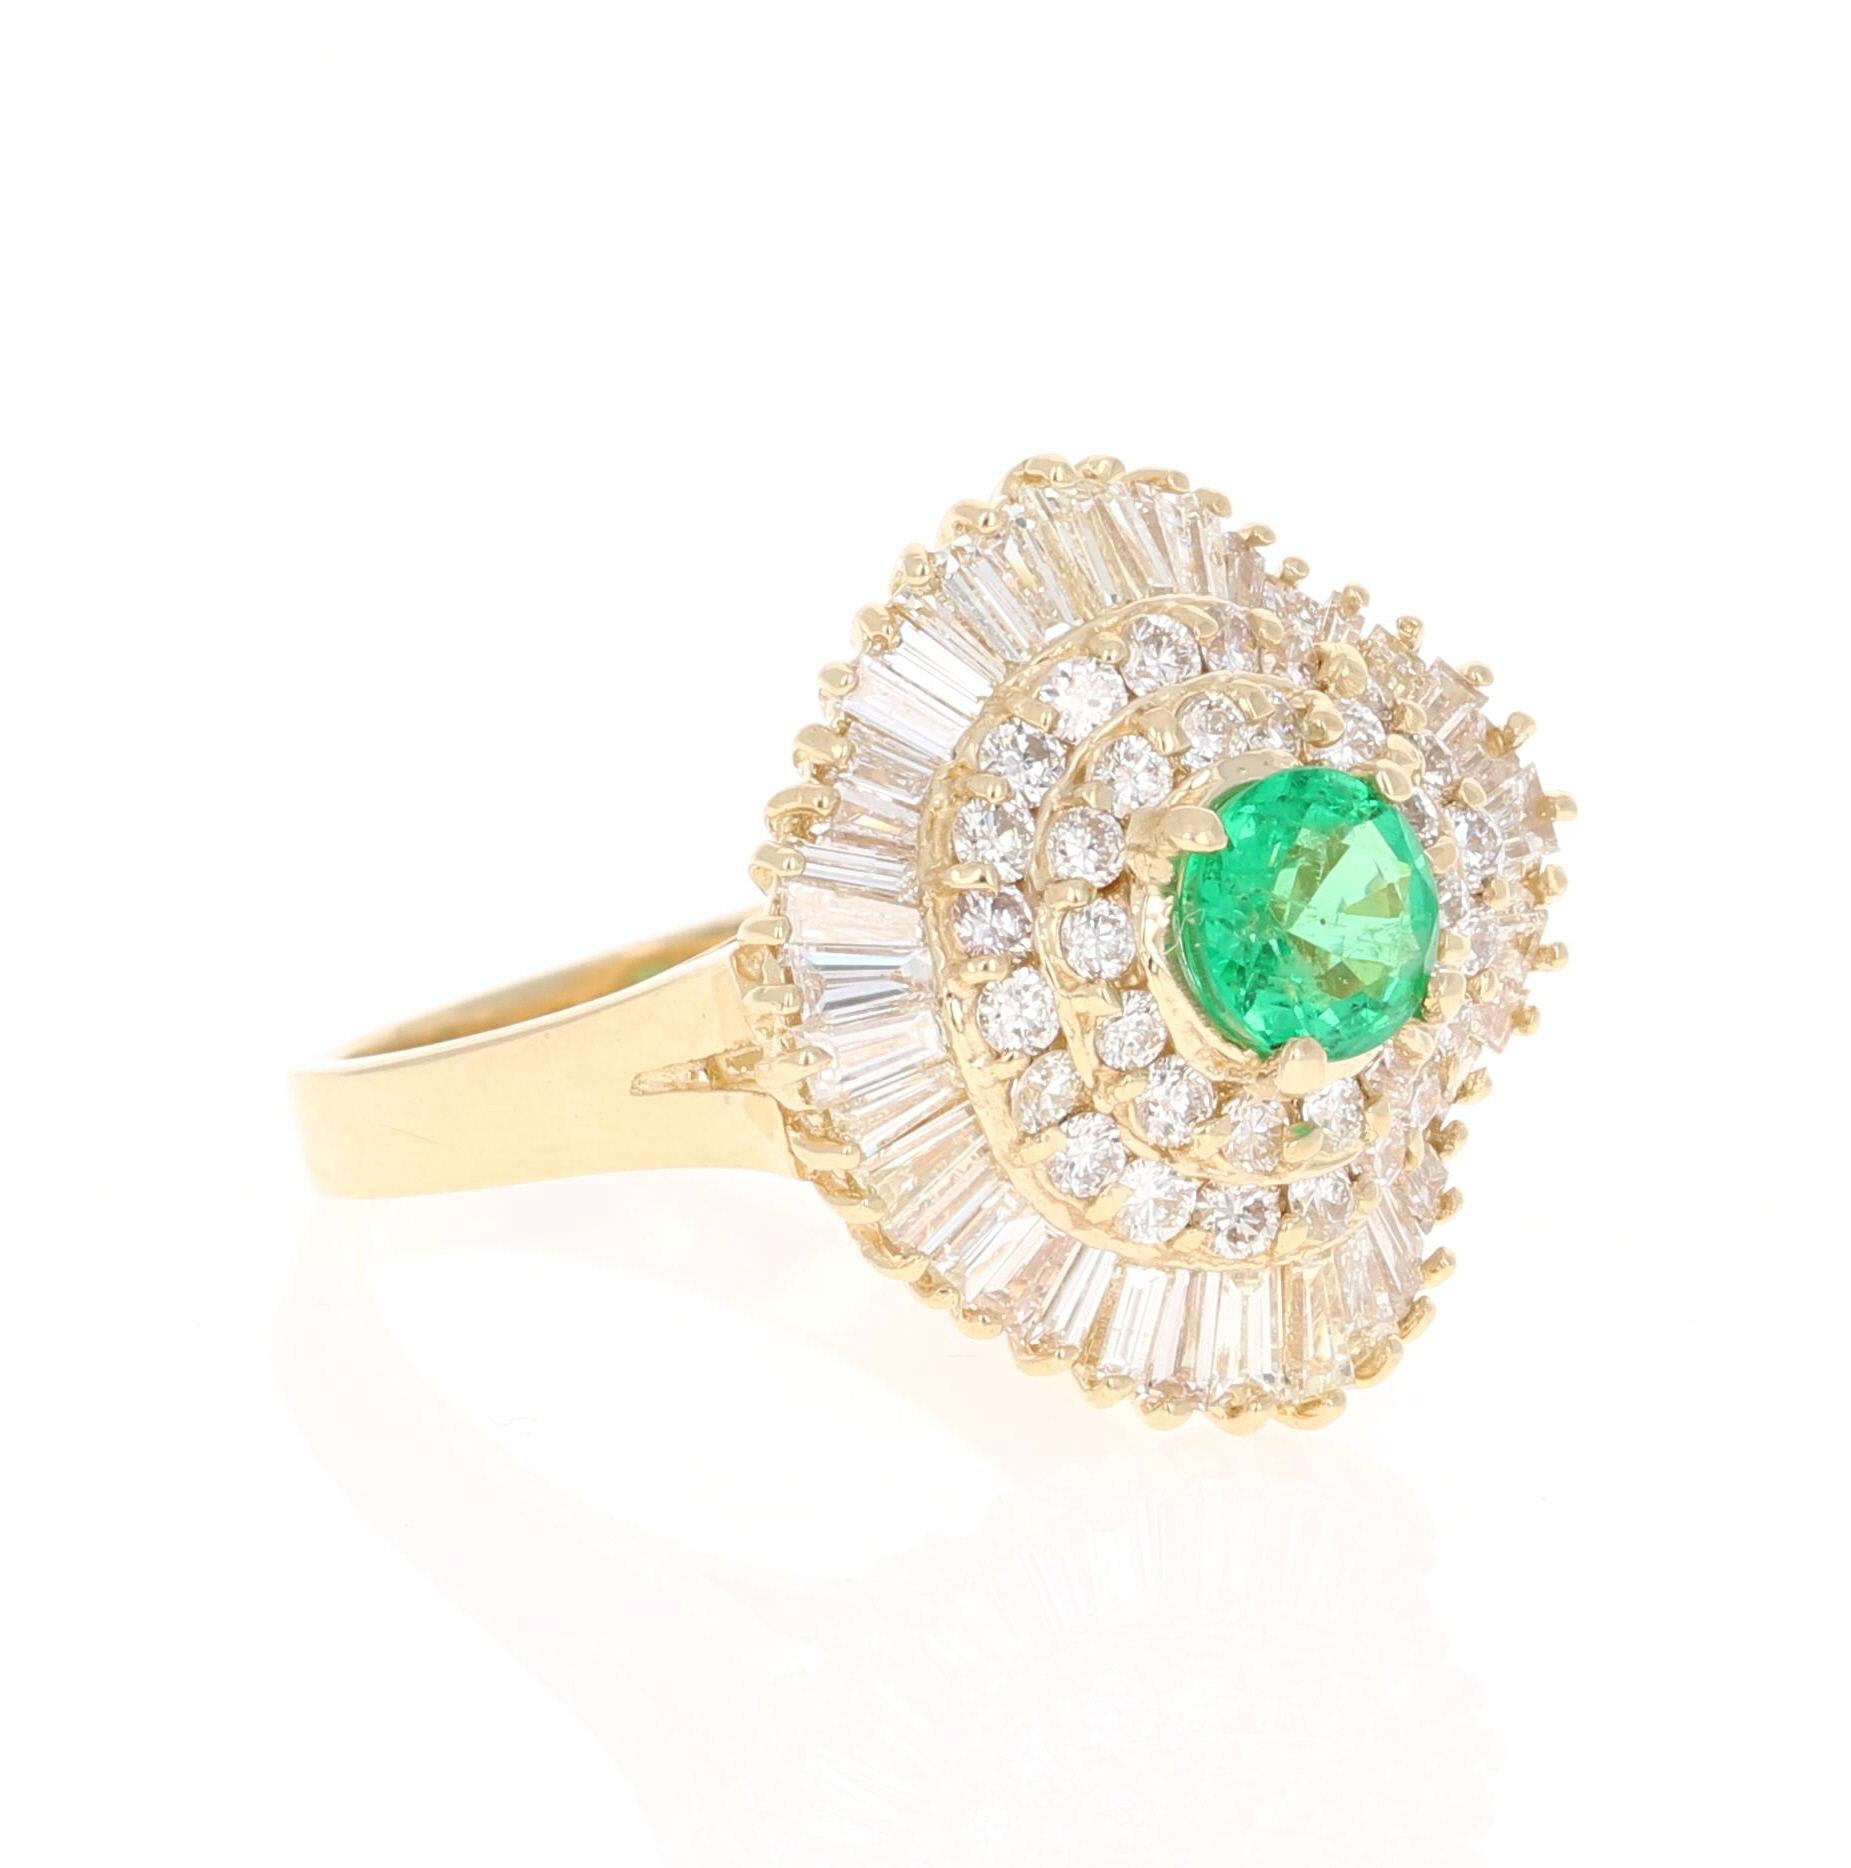 A beautiful 2.64 Carat Emerald and Diamond Ring in 14K Yellow Gold.
This gorgeous ring has a 0.72 Carat Round Cut Emerald that is set in the center of the ring! The Emerald is surrounded by 36 Round Cut Diamonds that weigh 0.72 carats as well as 44